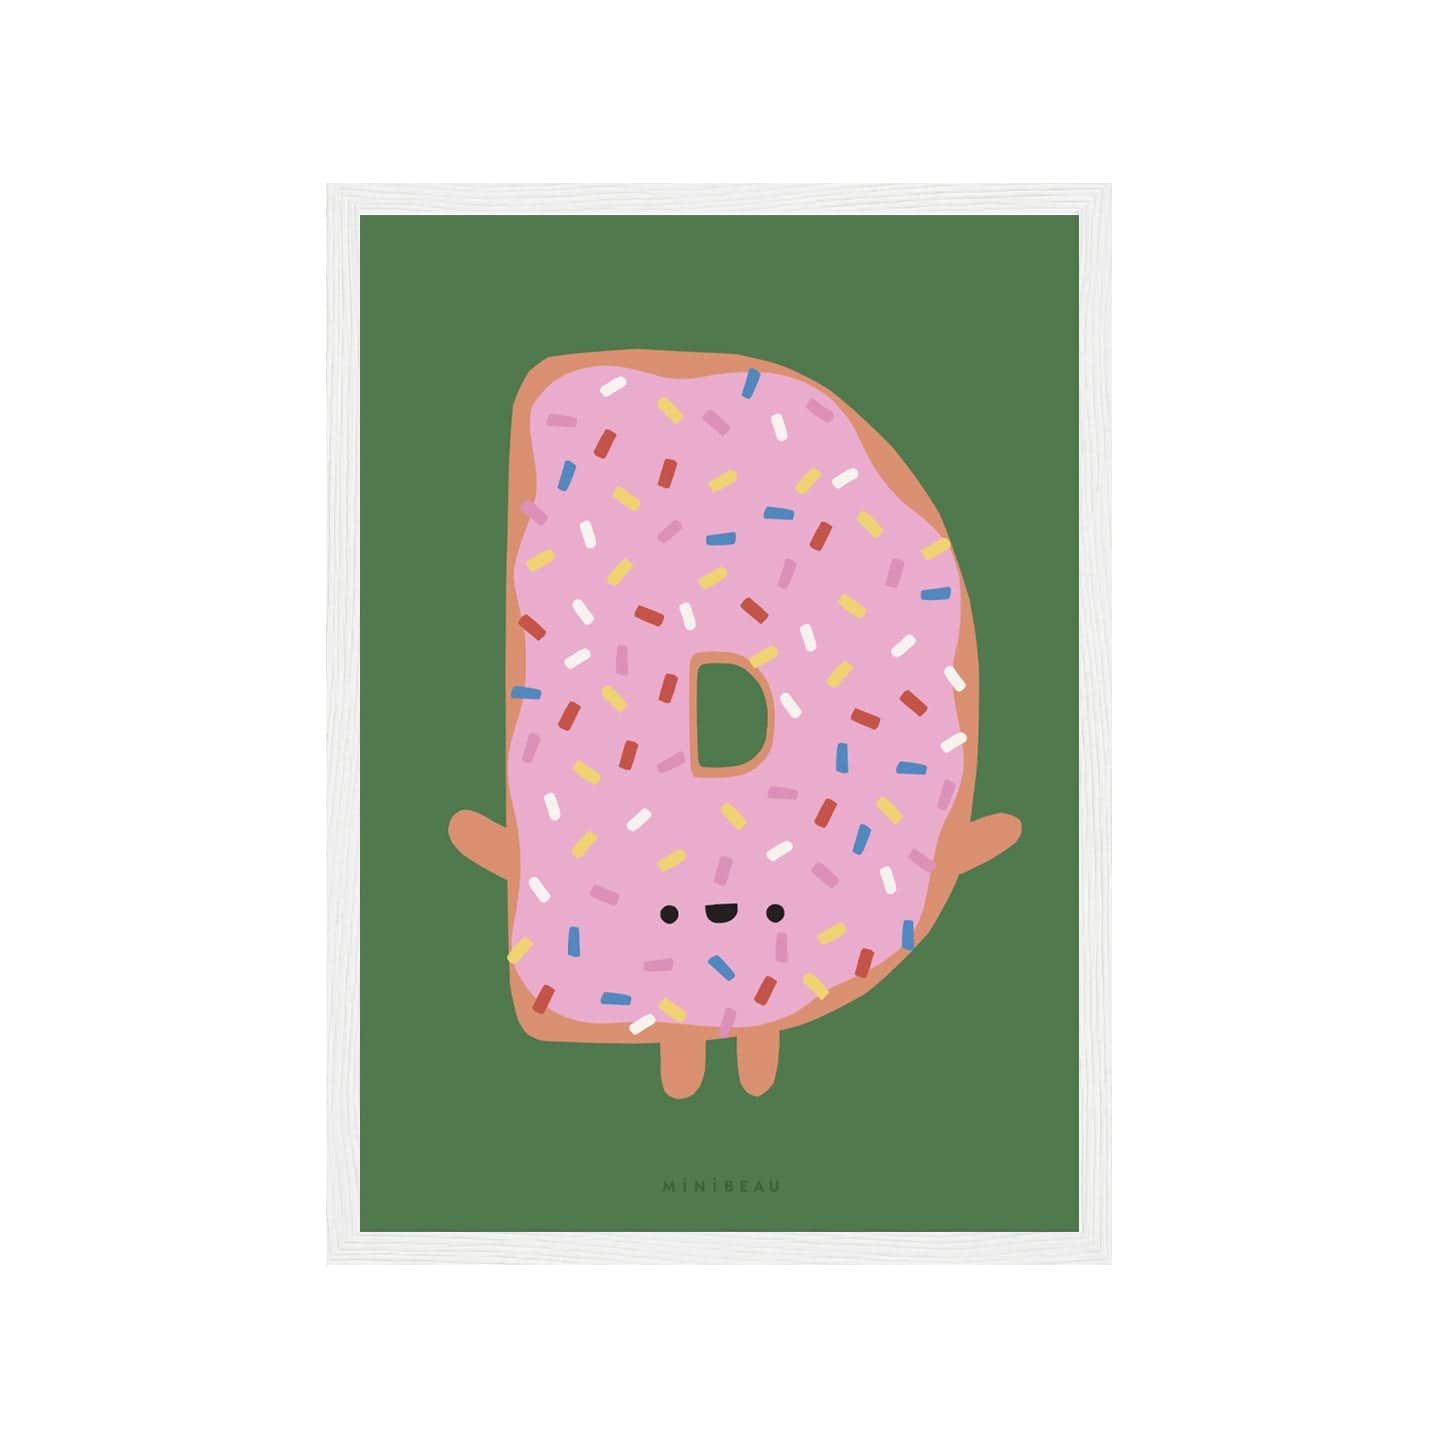 Art print in a white frame. Our Happy Alphabet 'D' Art Print shows aelephanteleph smiling iced doughnut in the shape of a D with short arms and legs. Icing is pink with multicoloured sprinkles and the print background is green.